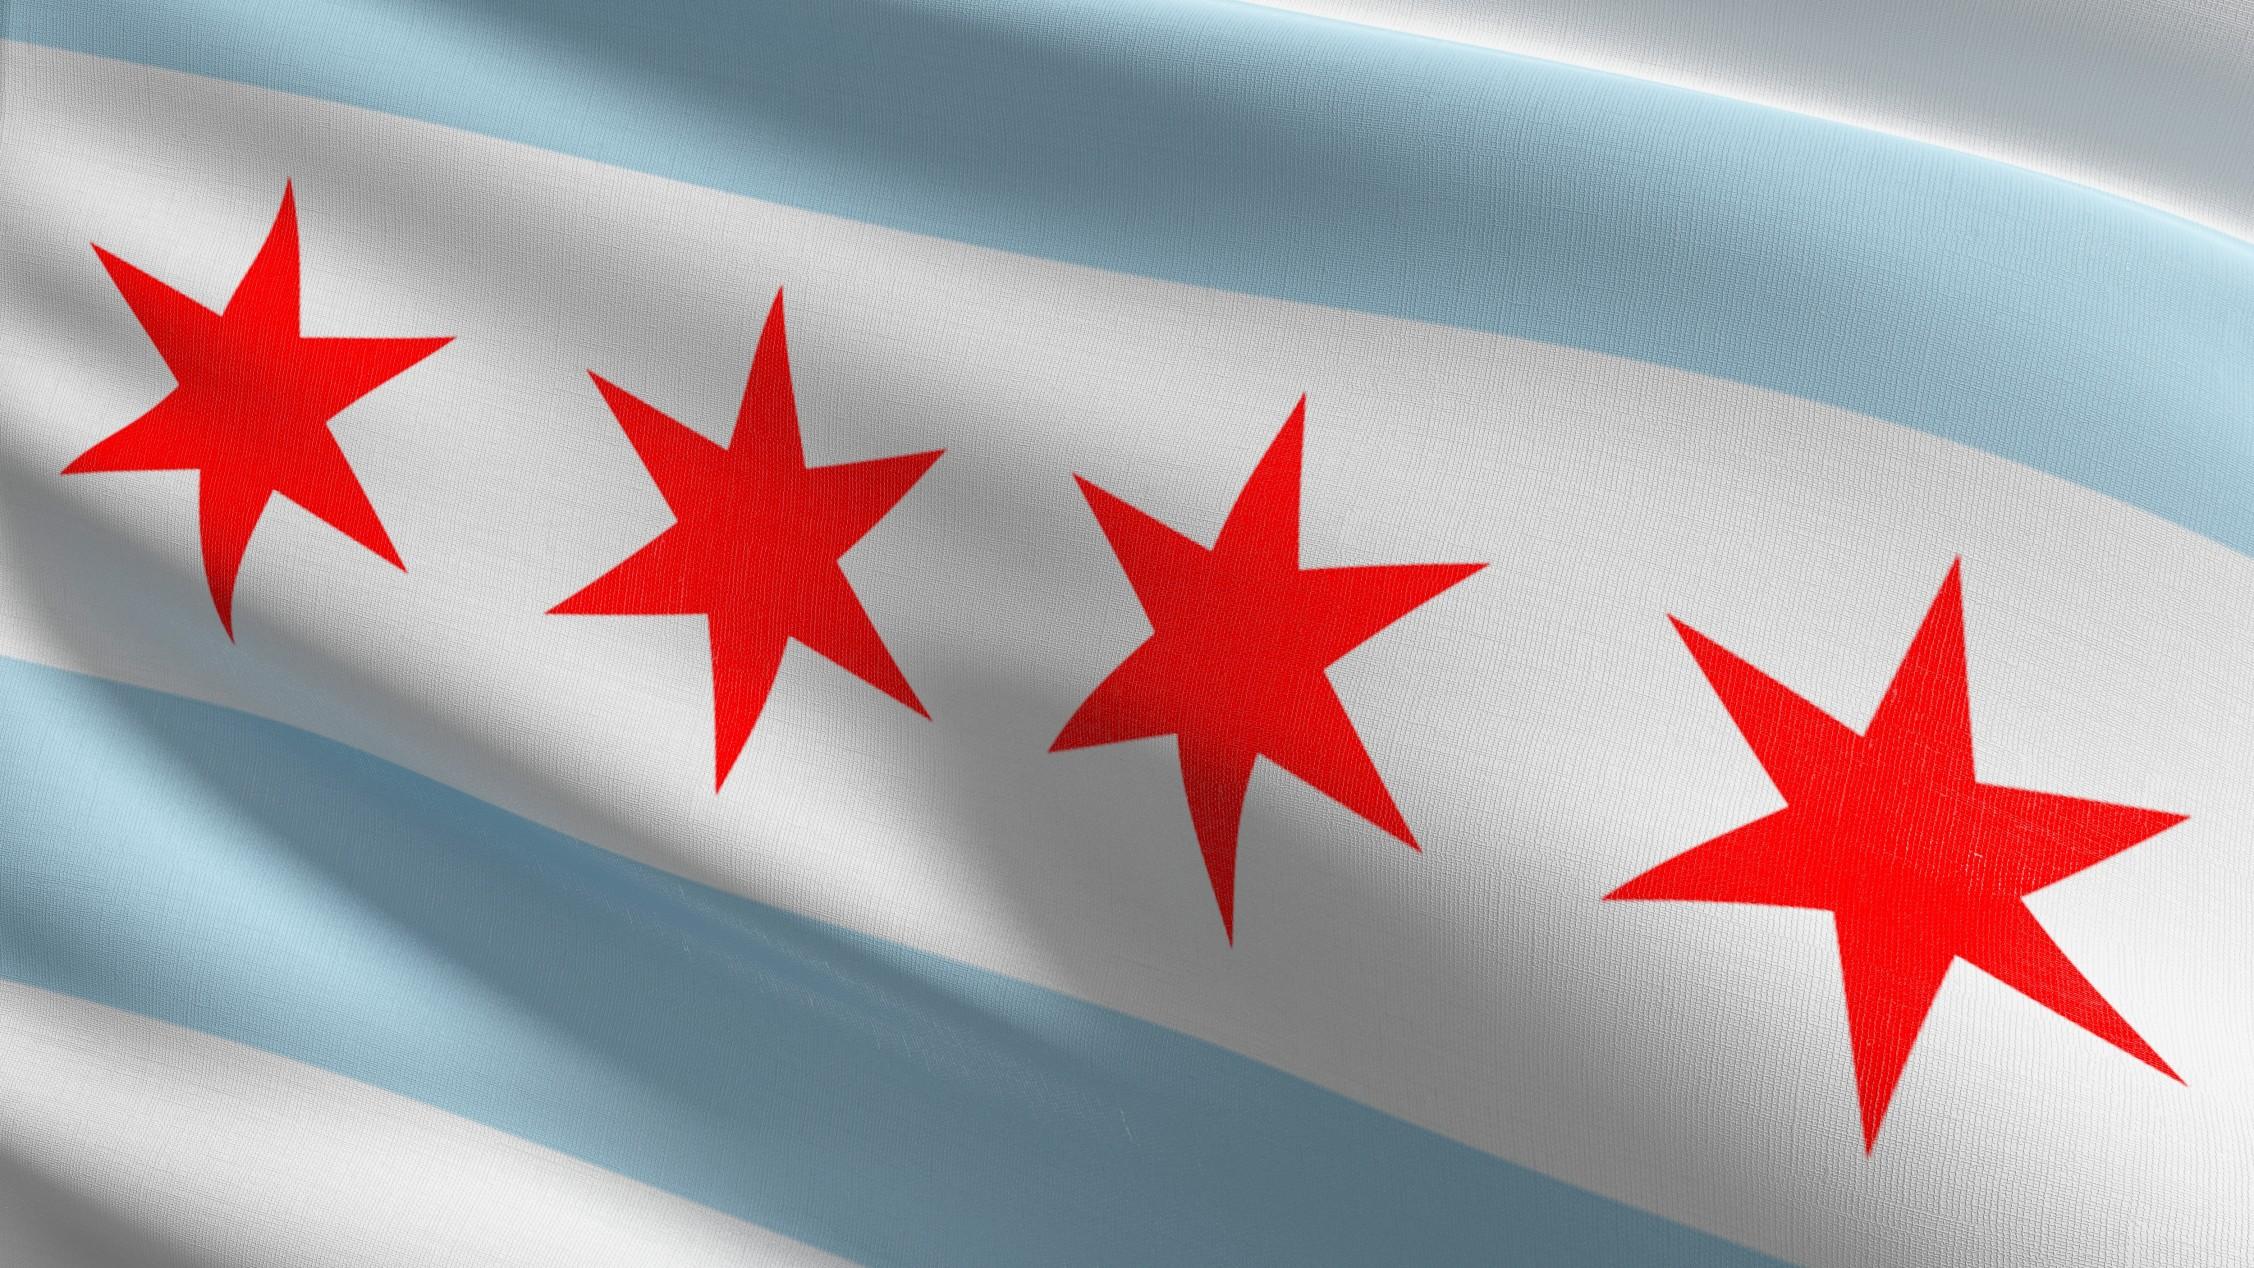 Illinois will make it easier than ever to verify you're insured | Twenty20